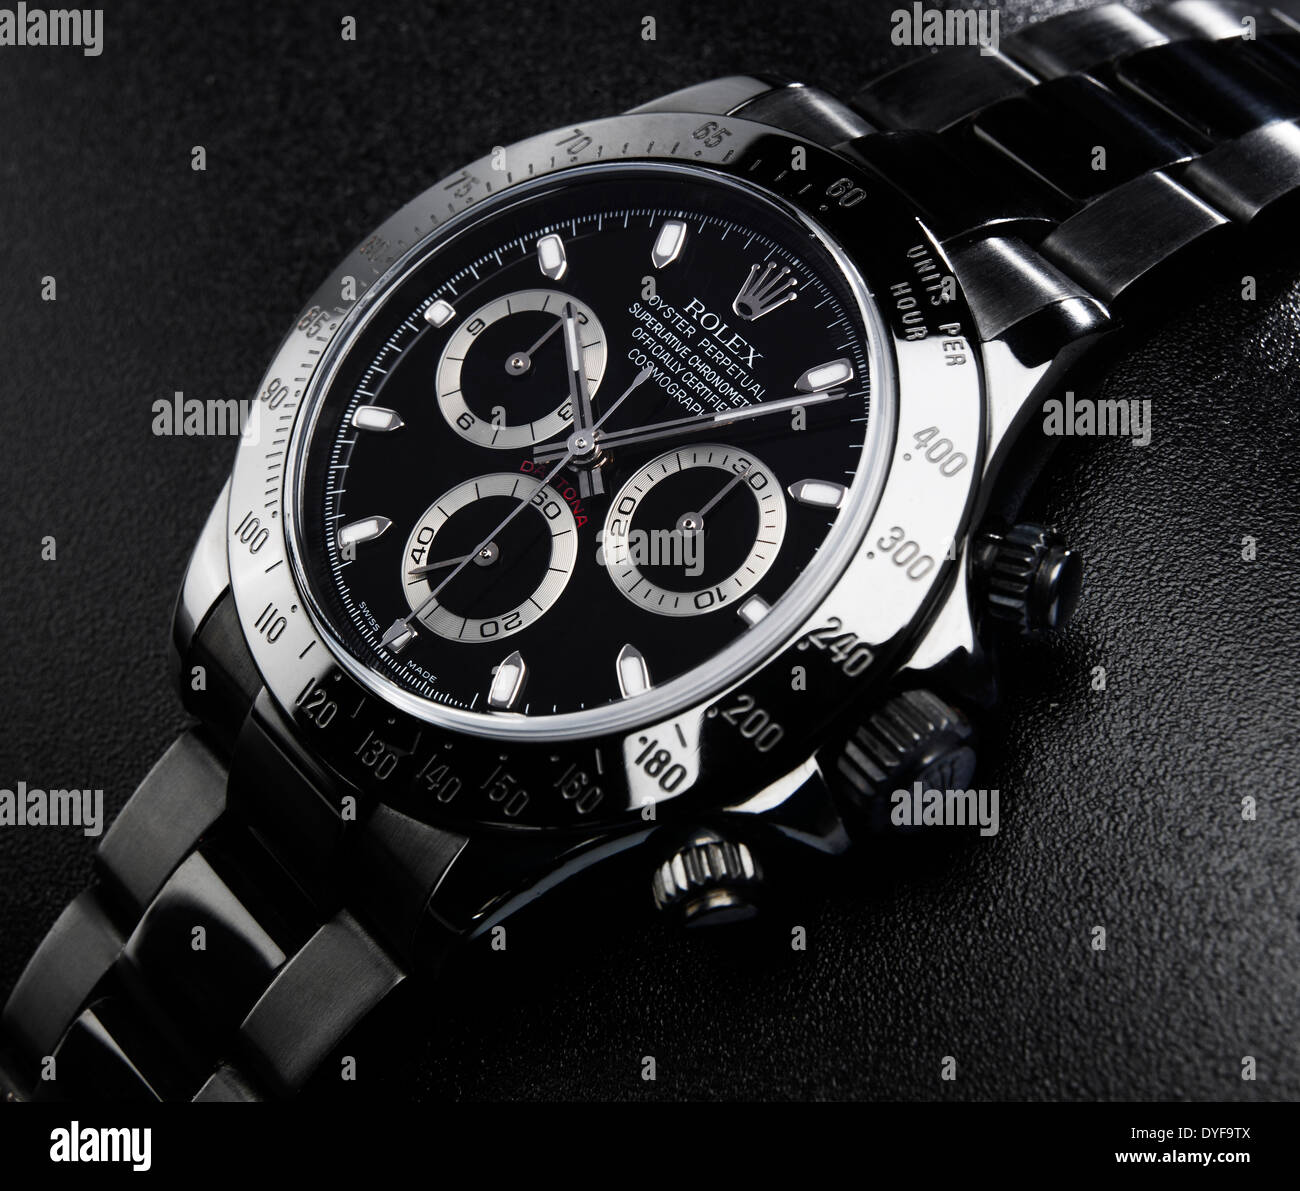 AN EXPENSIVE METAL ROLEX WATCH ON A BLACK BACKGROUND Stock Photo